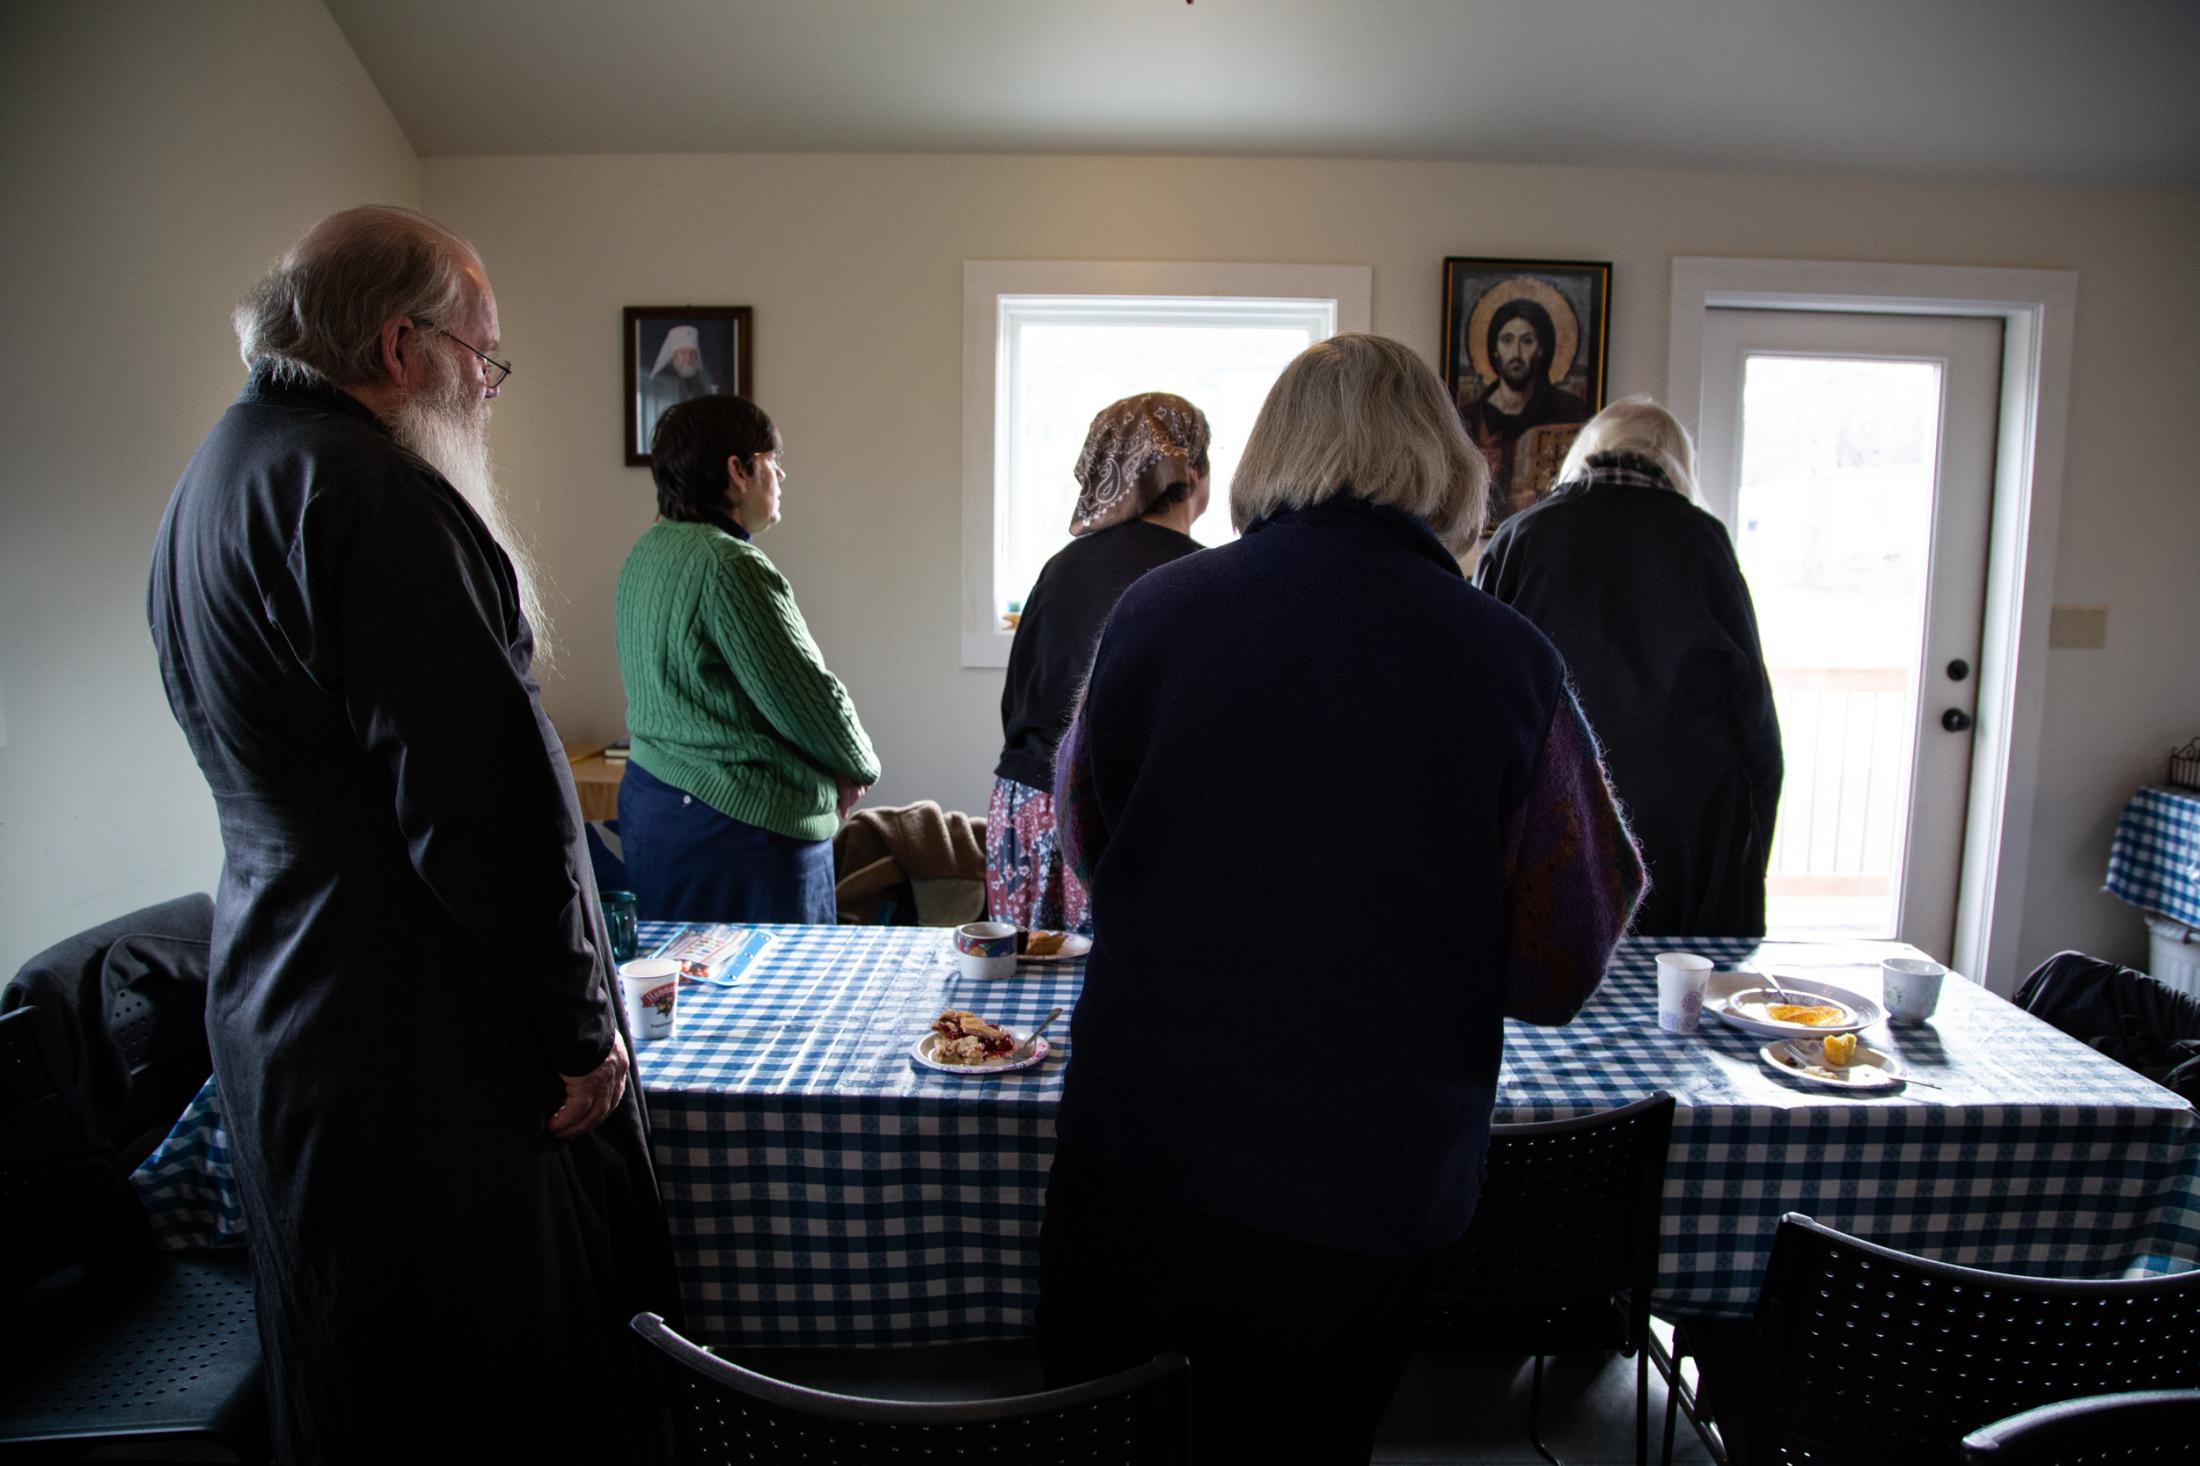 On Sunday&#39;s after church the community gathers for lunch, Agusta, Maine, 2014.